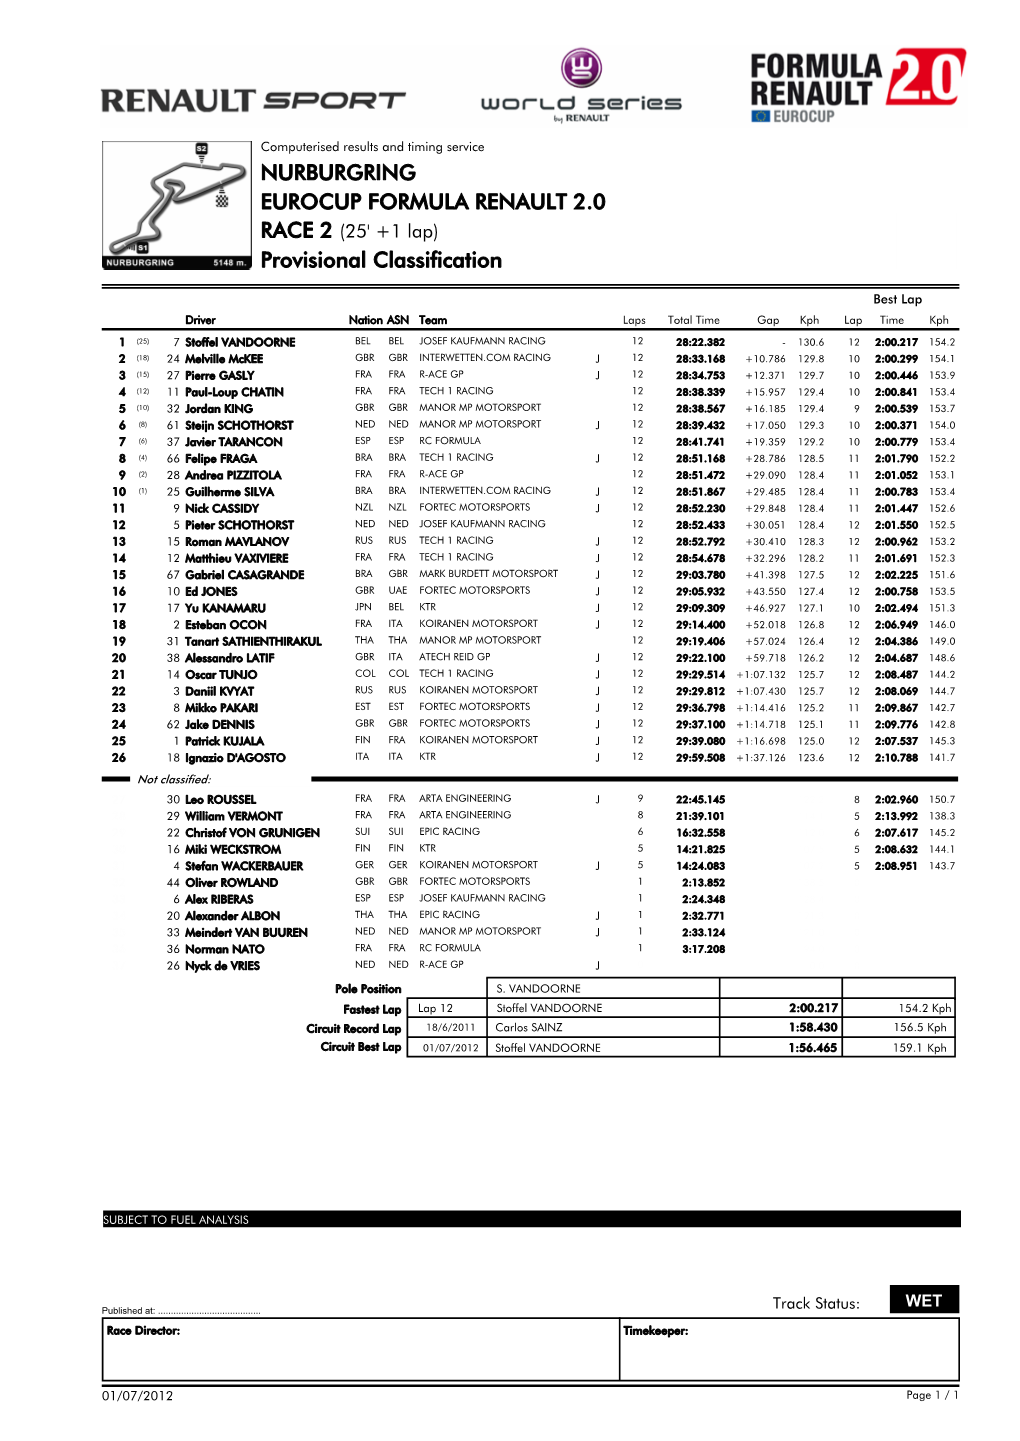 Provisional Classification NURBURGRING EUROCUP